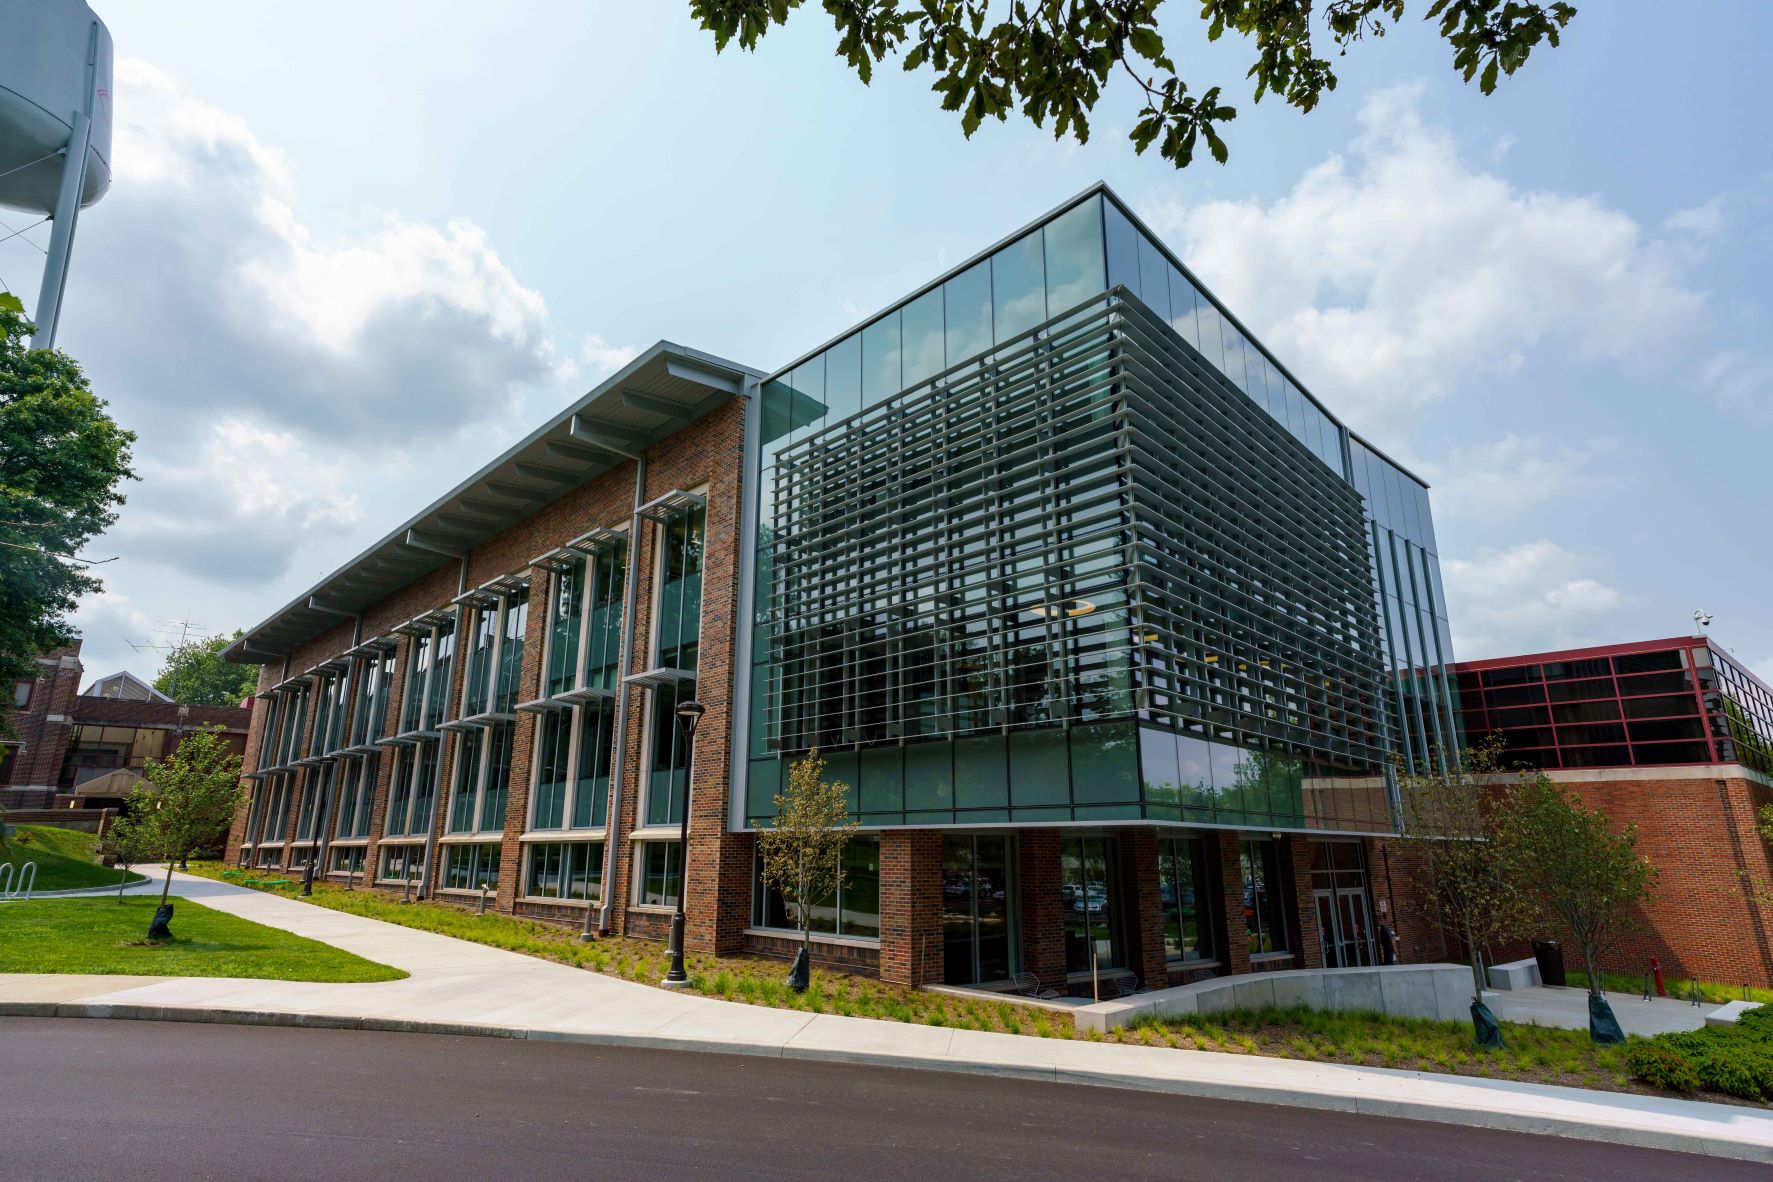 RoseHulman Institute of Technology’s New Academic Building